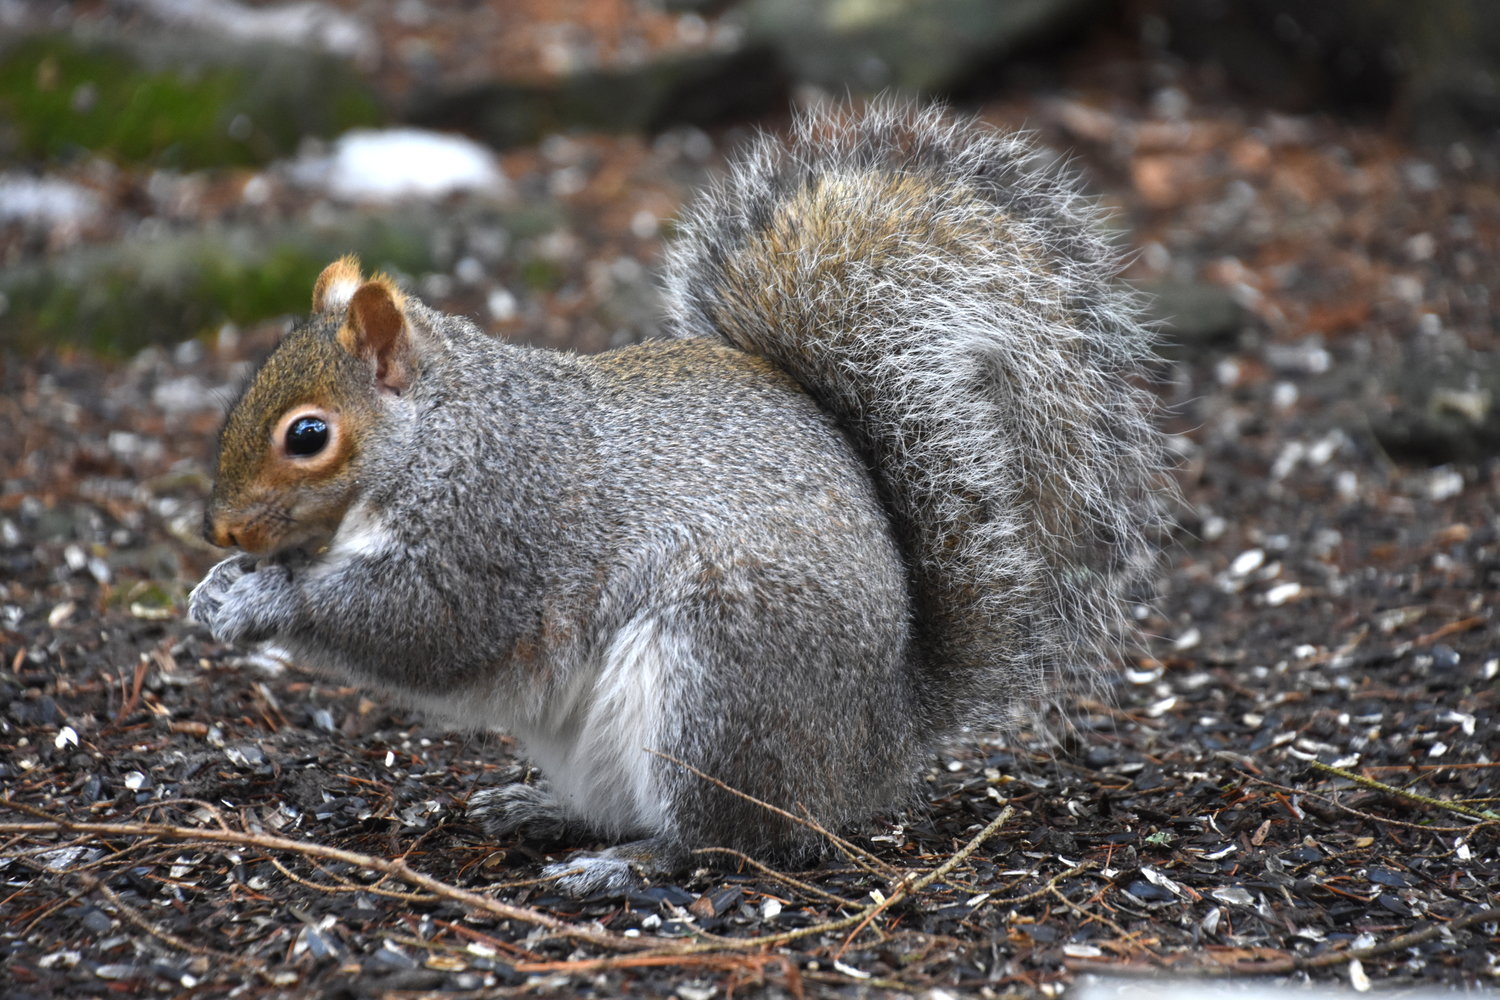 Gray squirrels. A thing of beauty. A joy forever. Take a moment to appreciate the silver finery of this creature’s fur, which never needs products to improve its perfection; the graceful arc of its shimmery tail; the glistening shine of its marble-like eye.